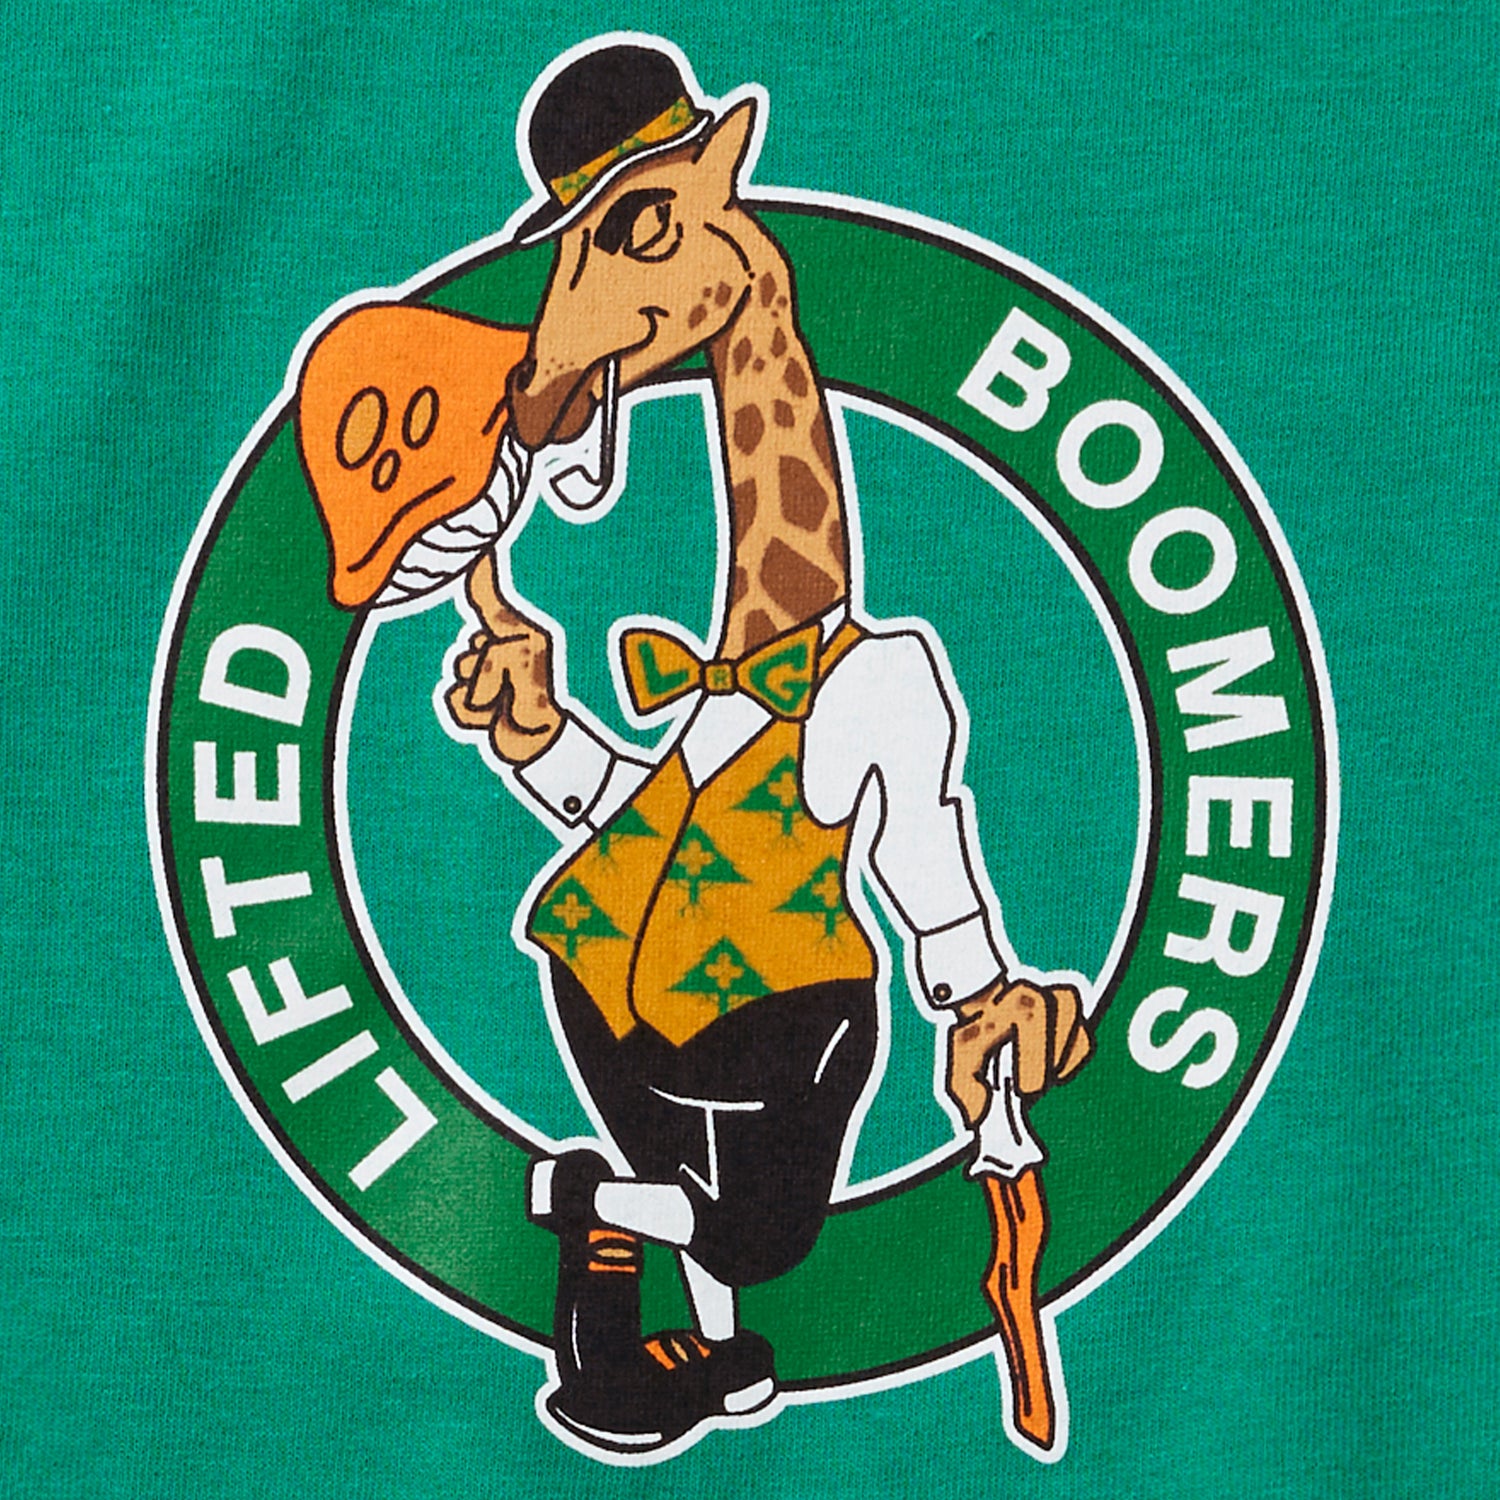 LIFTED BOOMERS TEE - KELLY GREEN